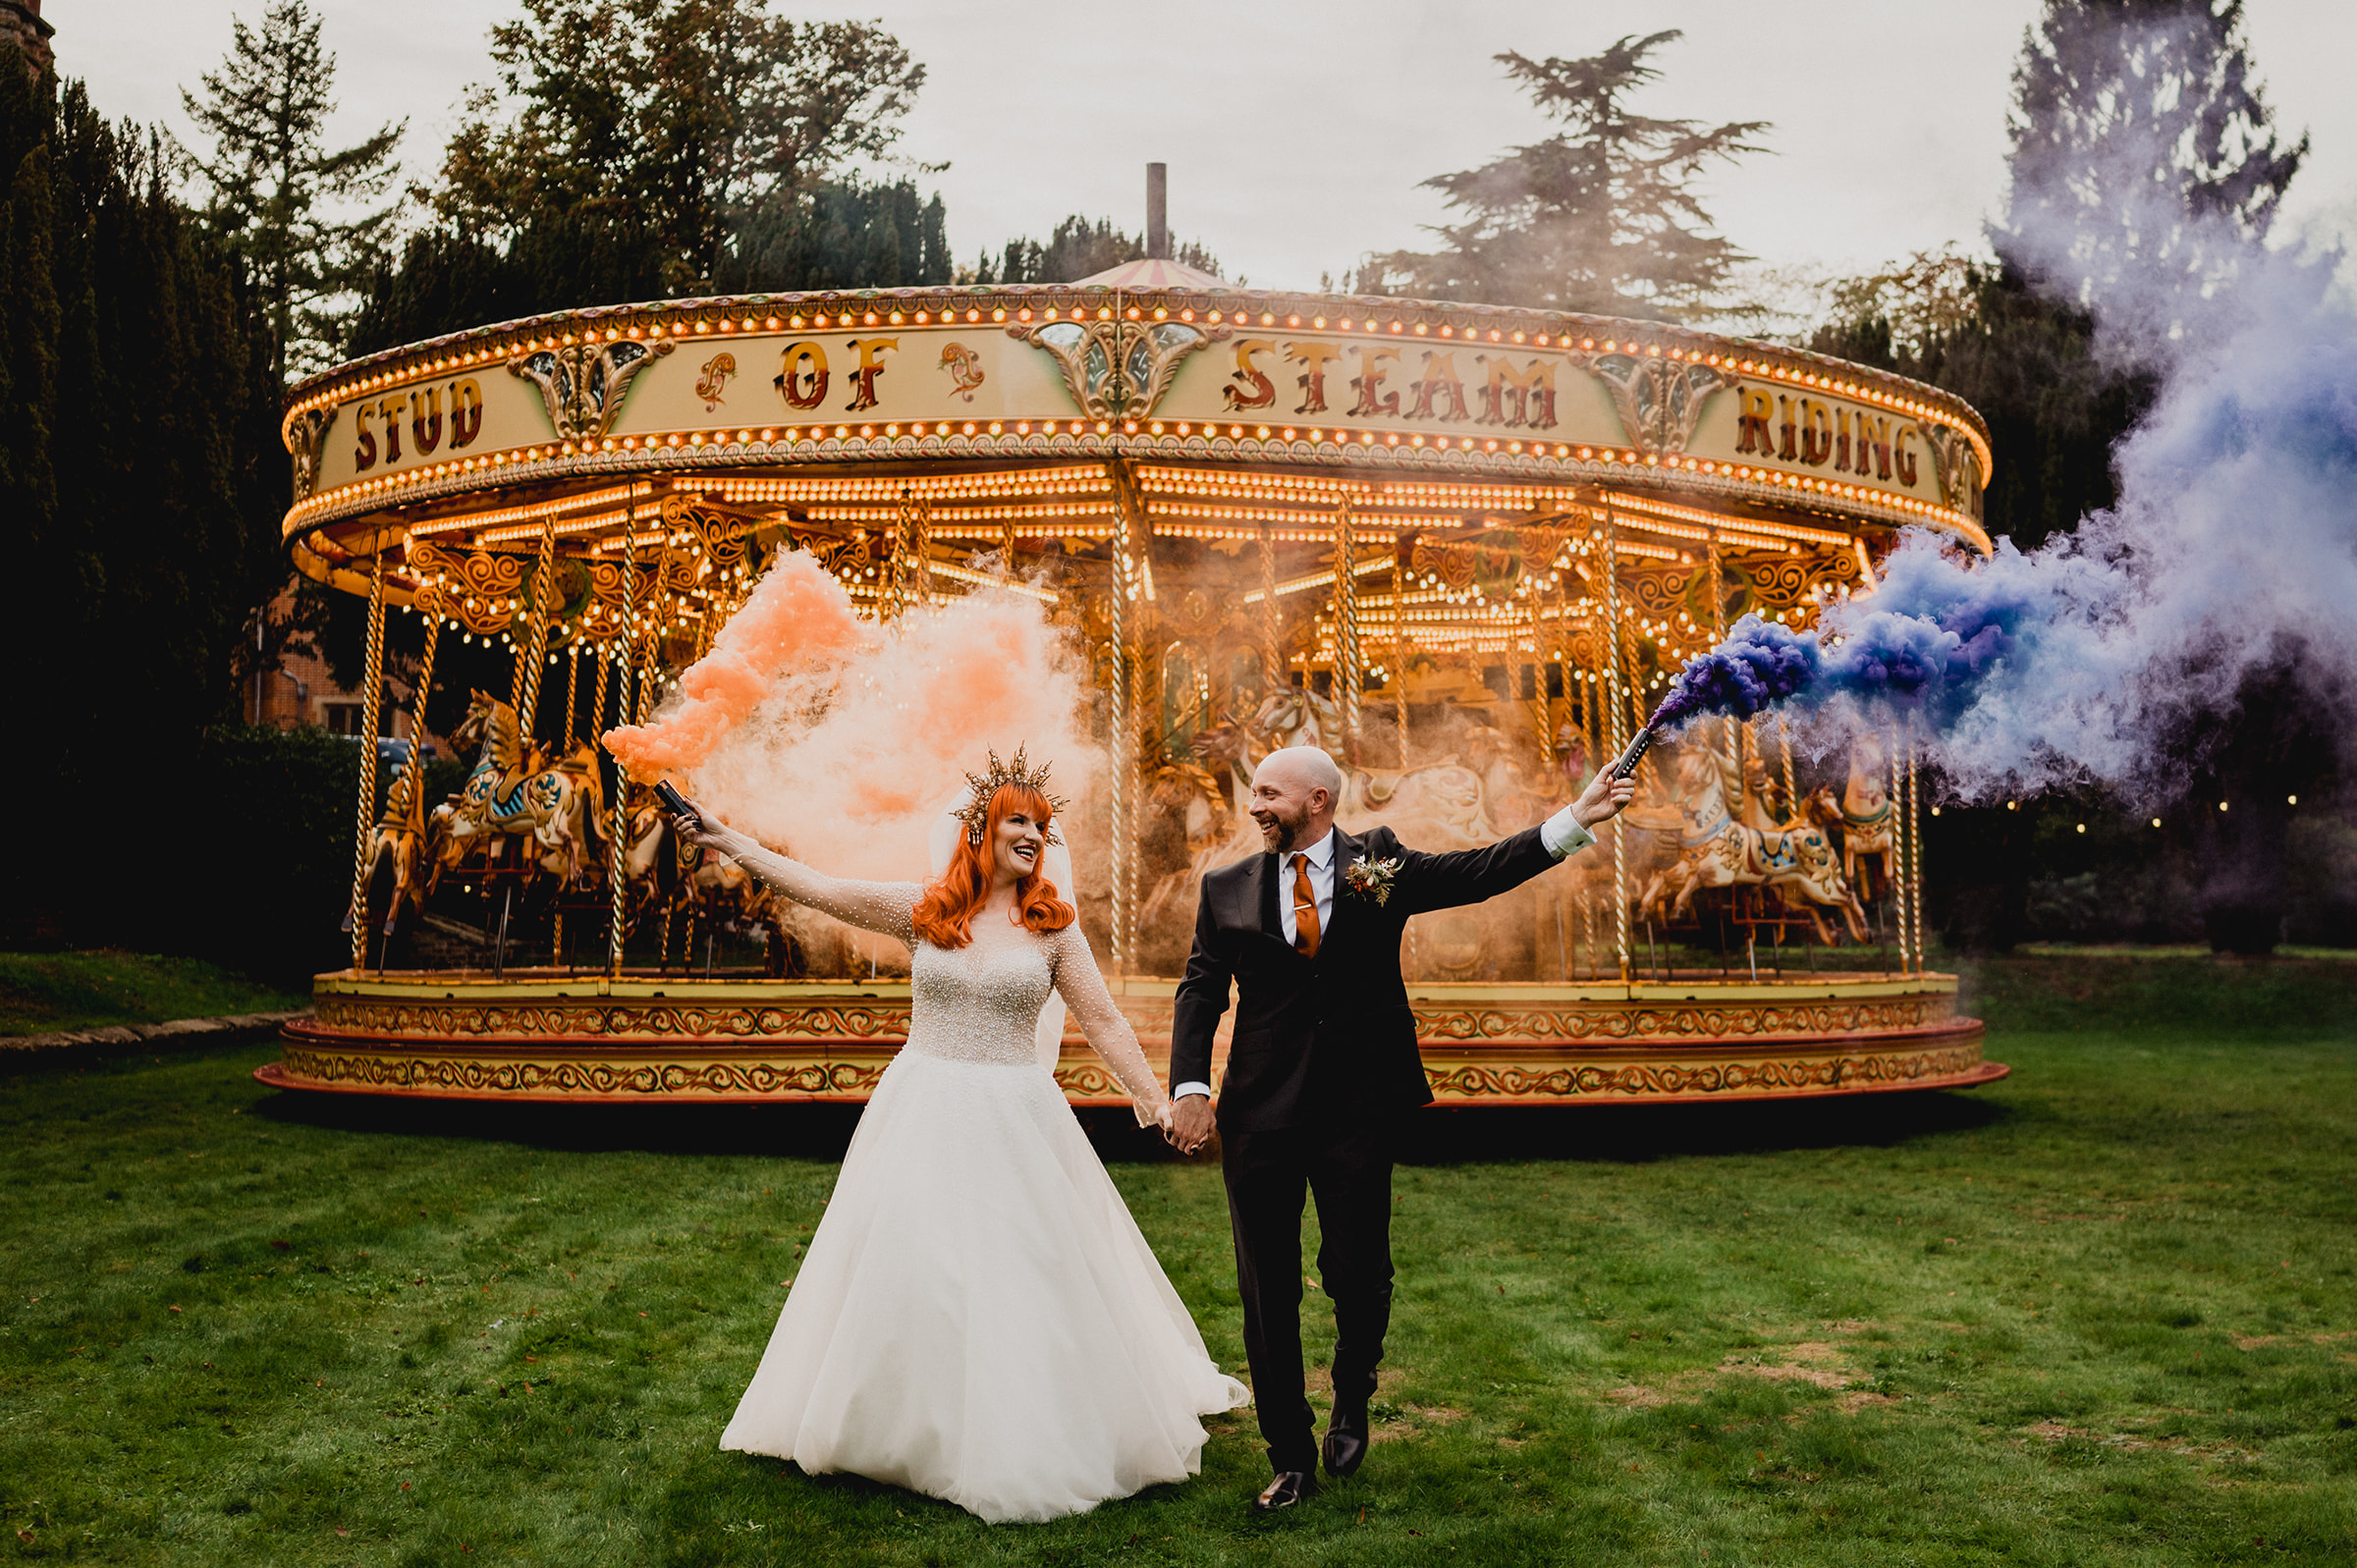 A bride and groom pose in front of a merry go round